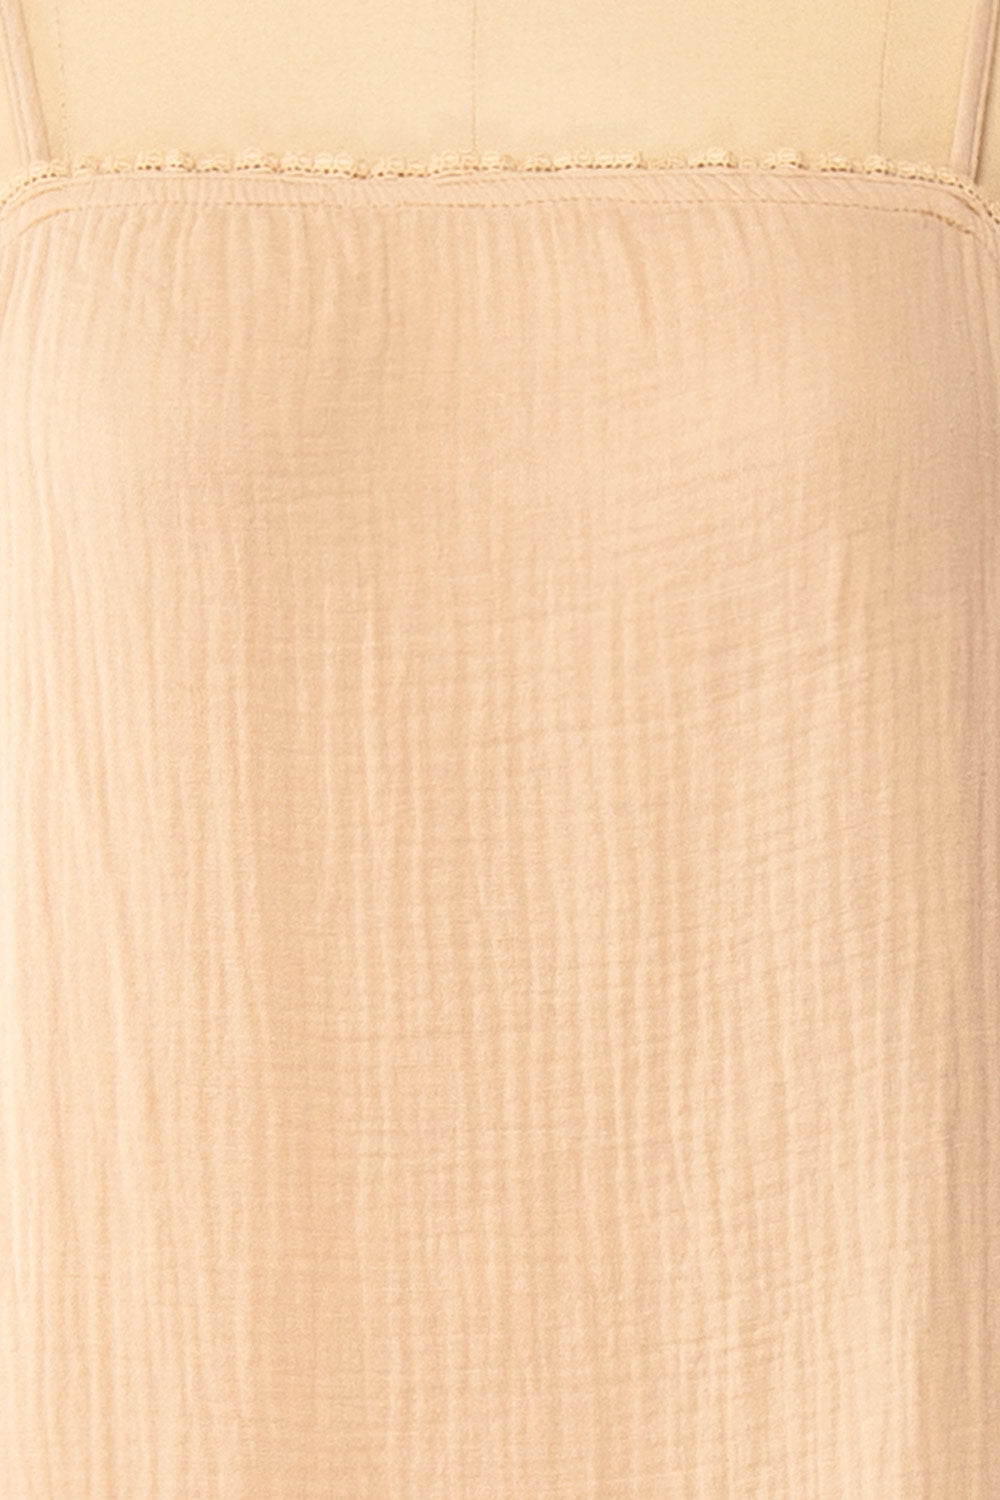 Marinet Beige Long Loose-Fitted Dress | Boutique 1861 fabric 